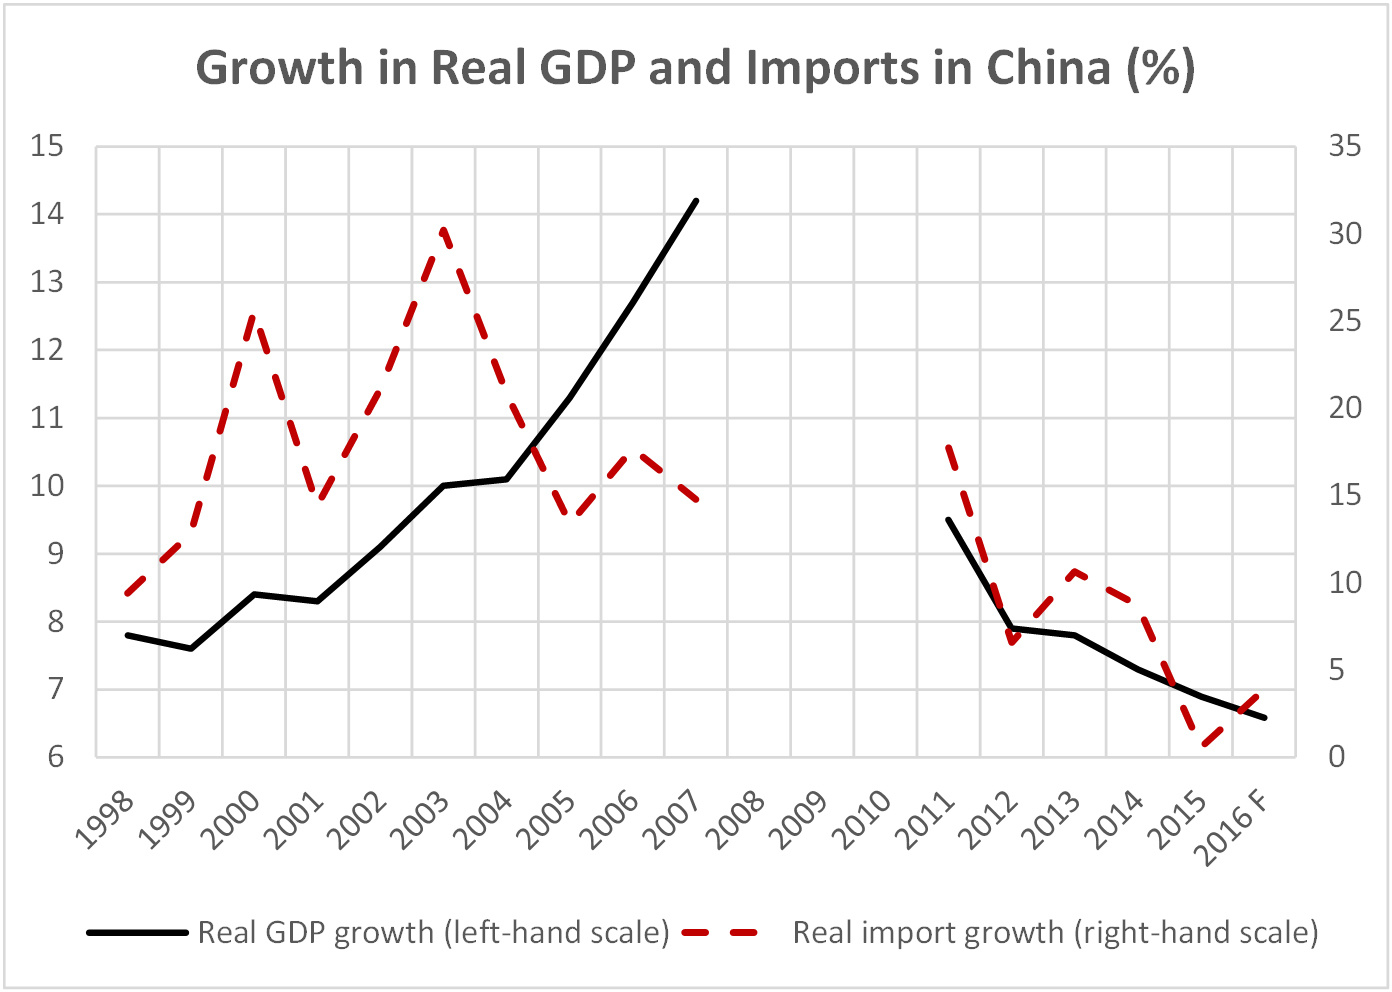 Chart 1.7 - Growth in Real GDP and Imports in China